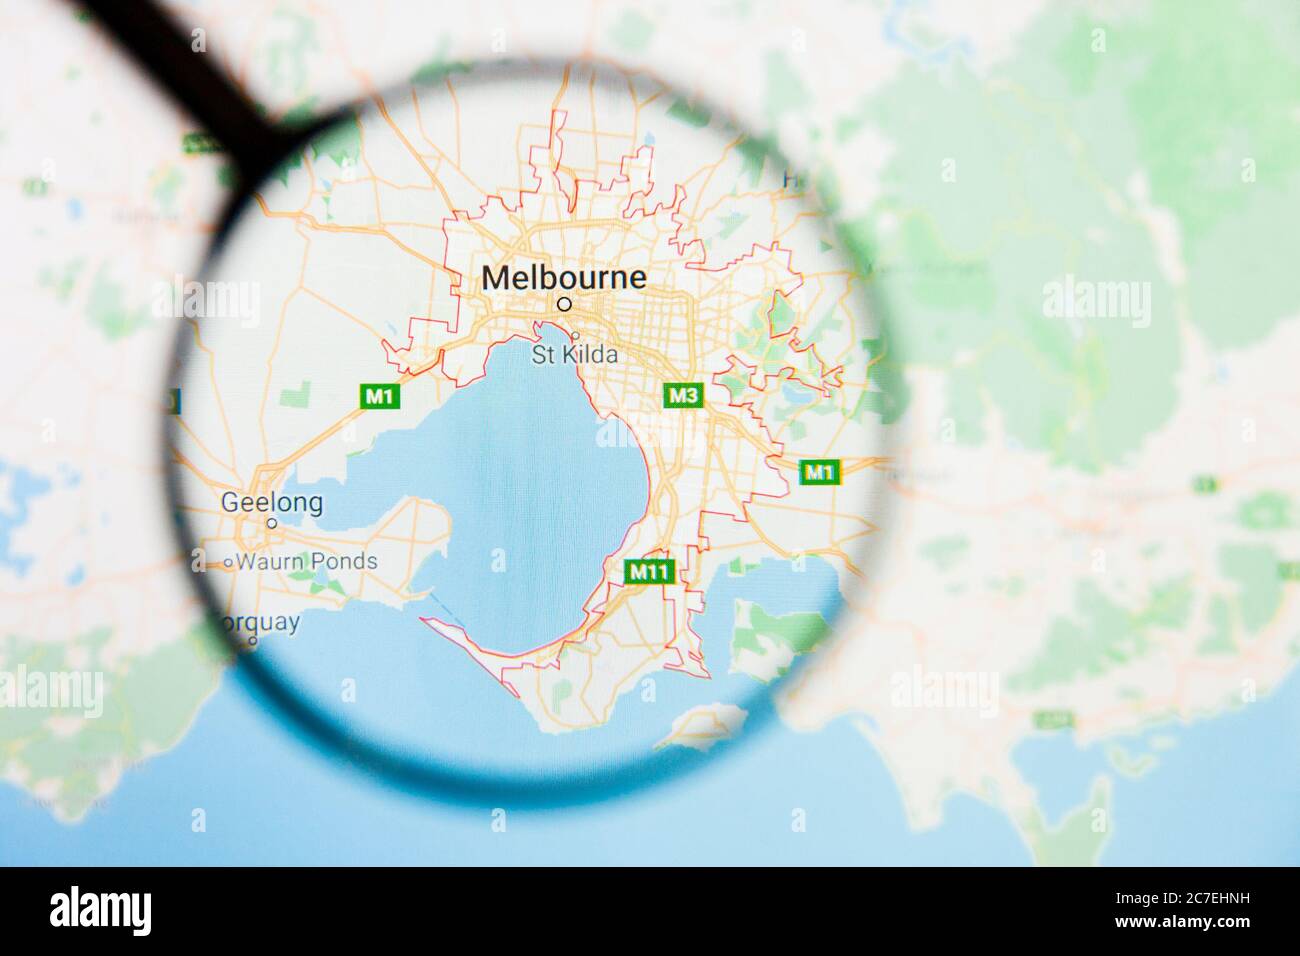 Gps australia map location stock photography and images - Alamy